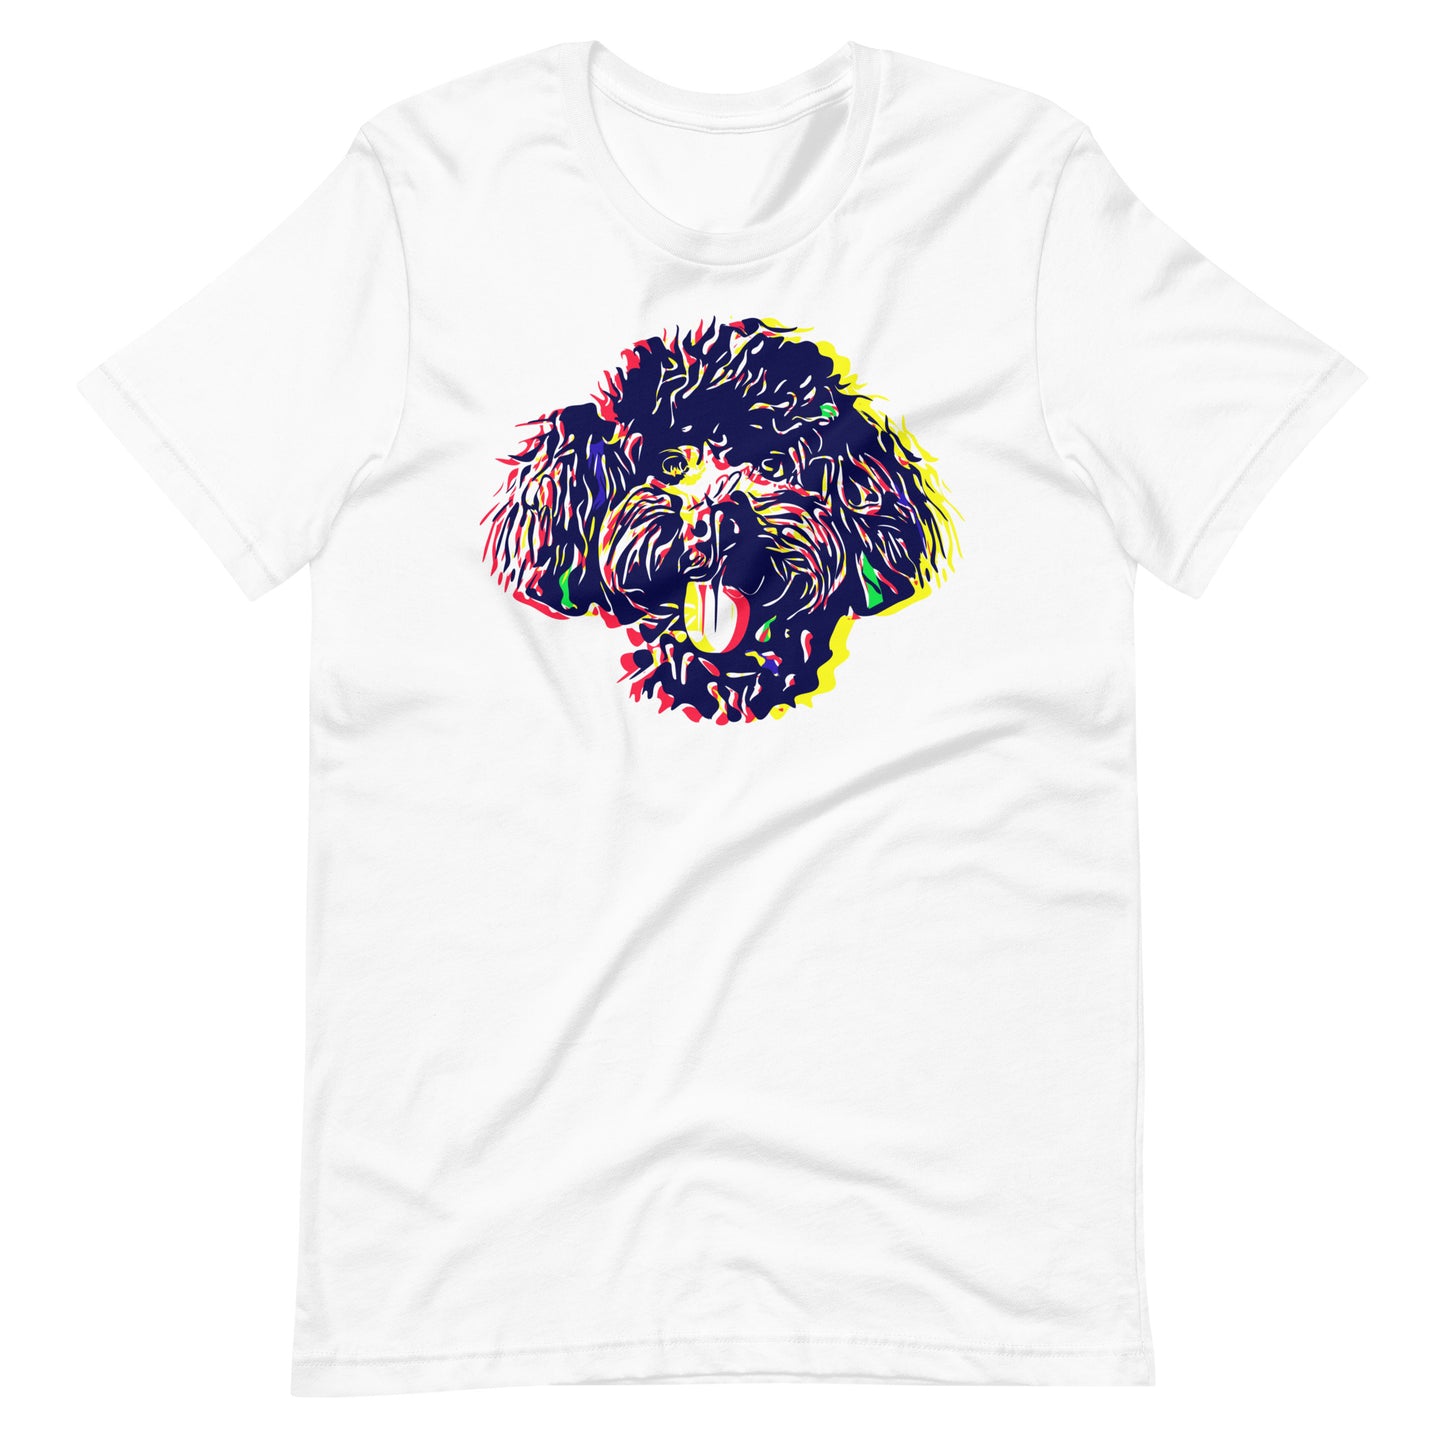 Colored Toy Poodle face silhouette on unisex white t-shirt